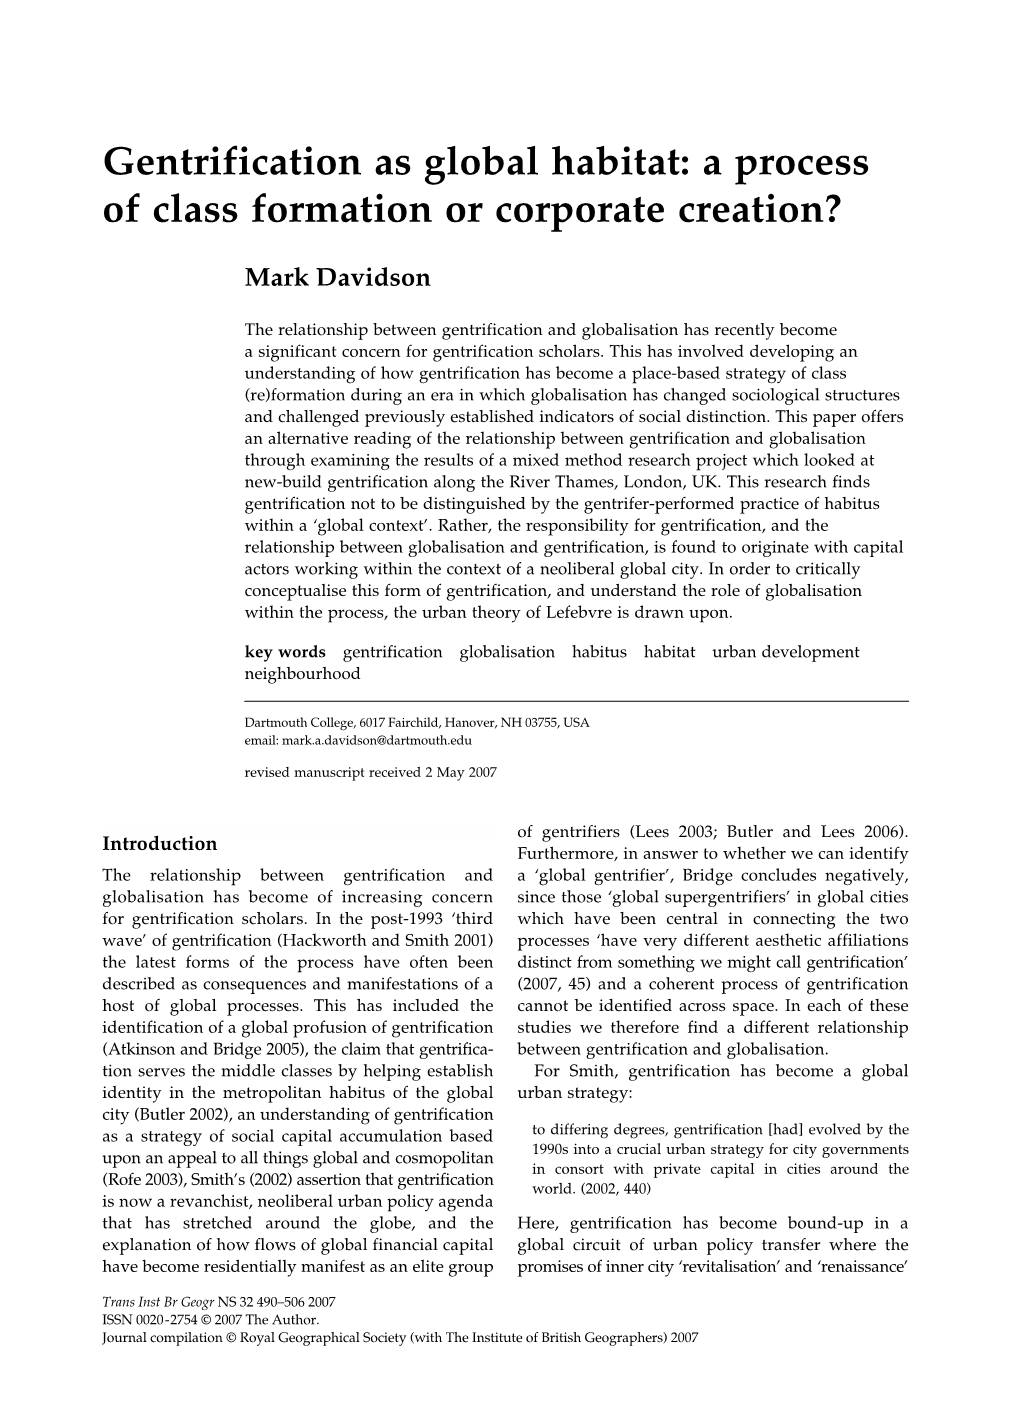 Gentrification As Global Habitat: a Process of Class Formation Or Corporate Creation?